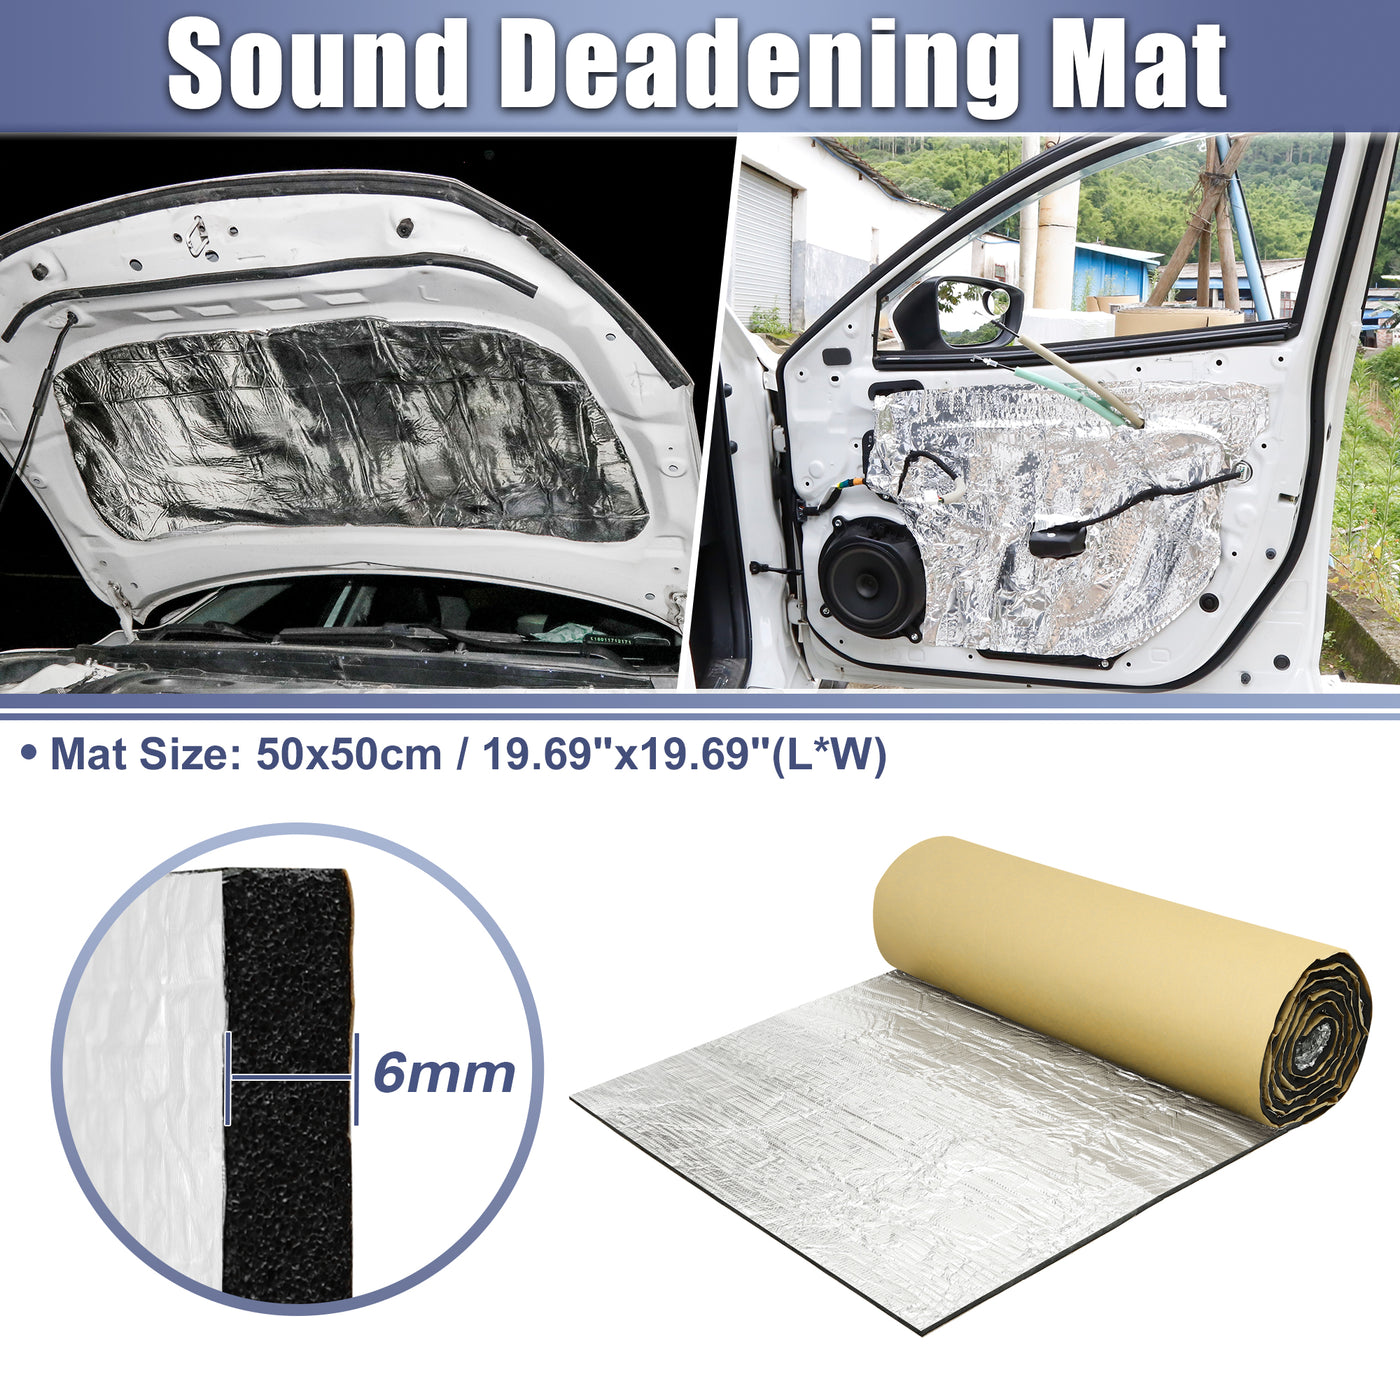 X AUTOHAUX 236mil 6mm 2.69sqft Car Sound Deadening Mat Aluminum Closed Cell Foam Heat Shield Material Damping Self Adhesive Universal for Hood Fender and Boat Engine Cover 19.69"x19.69"